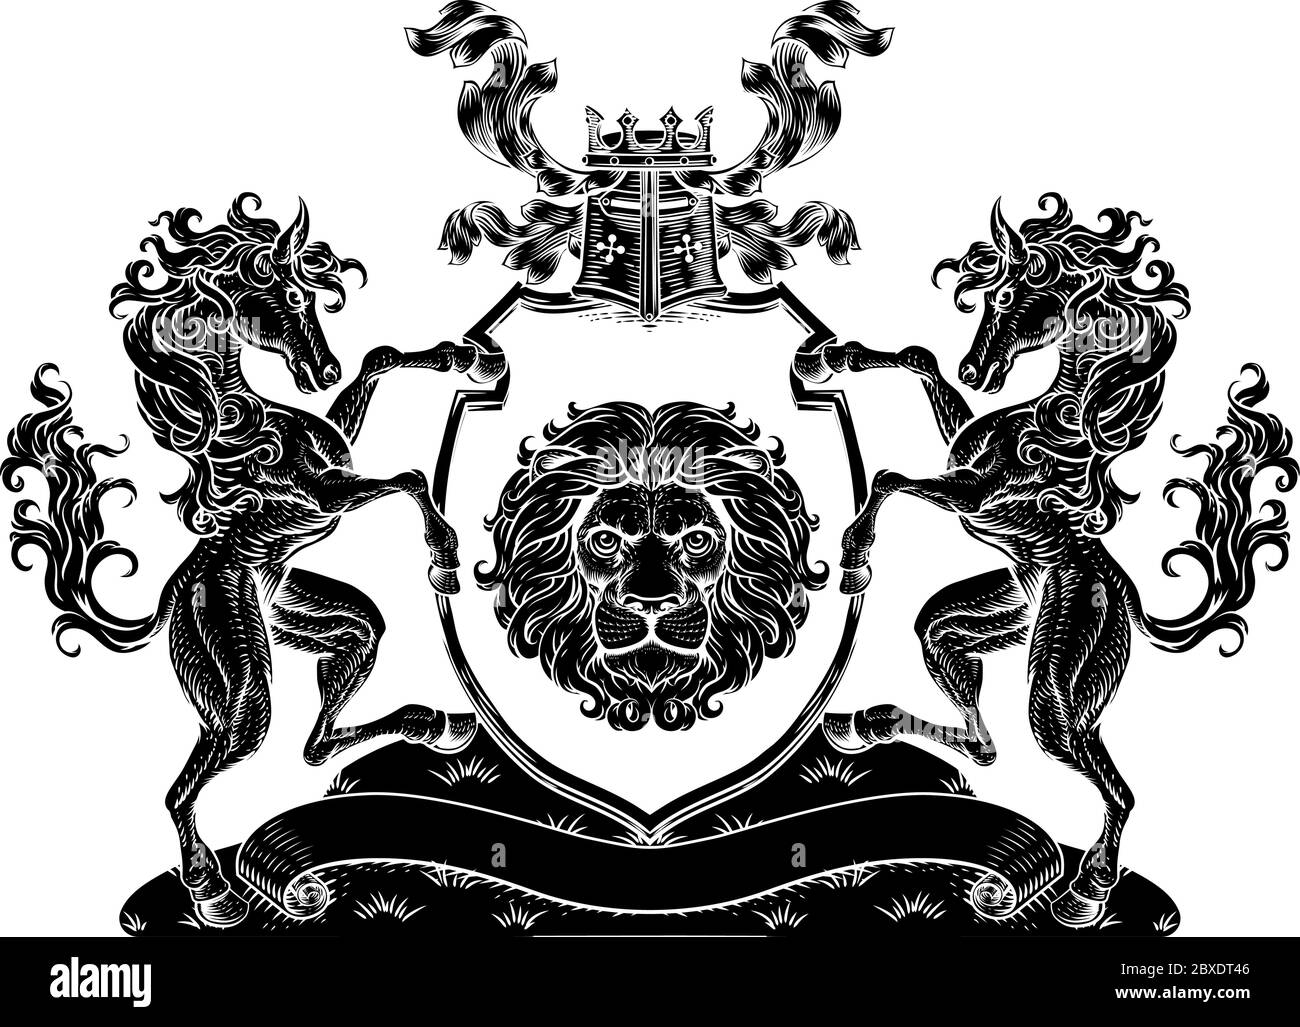 Coat of Arms Crest Horse Lion Family Shield Seal Stock Vector